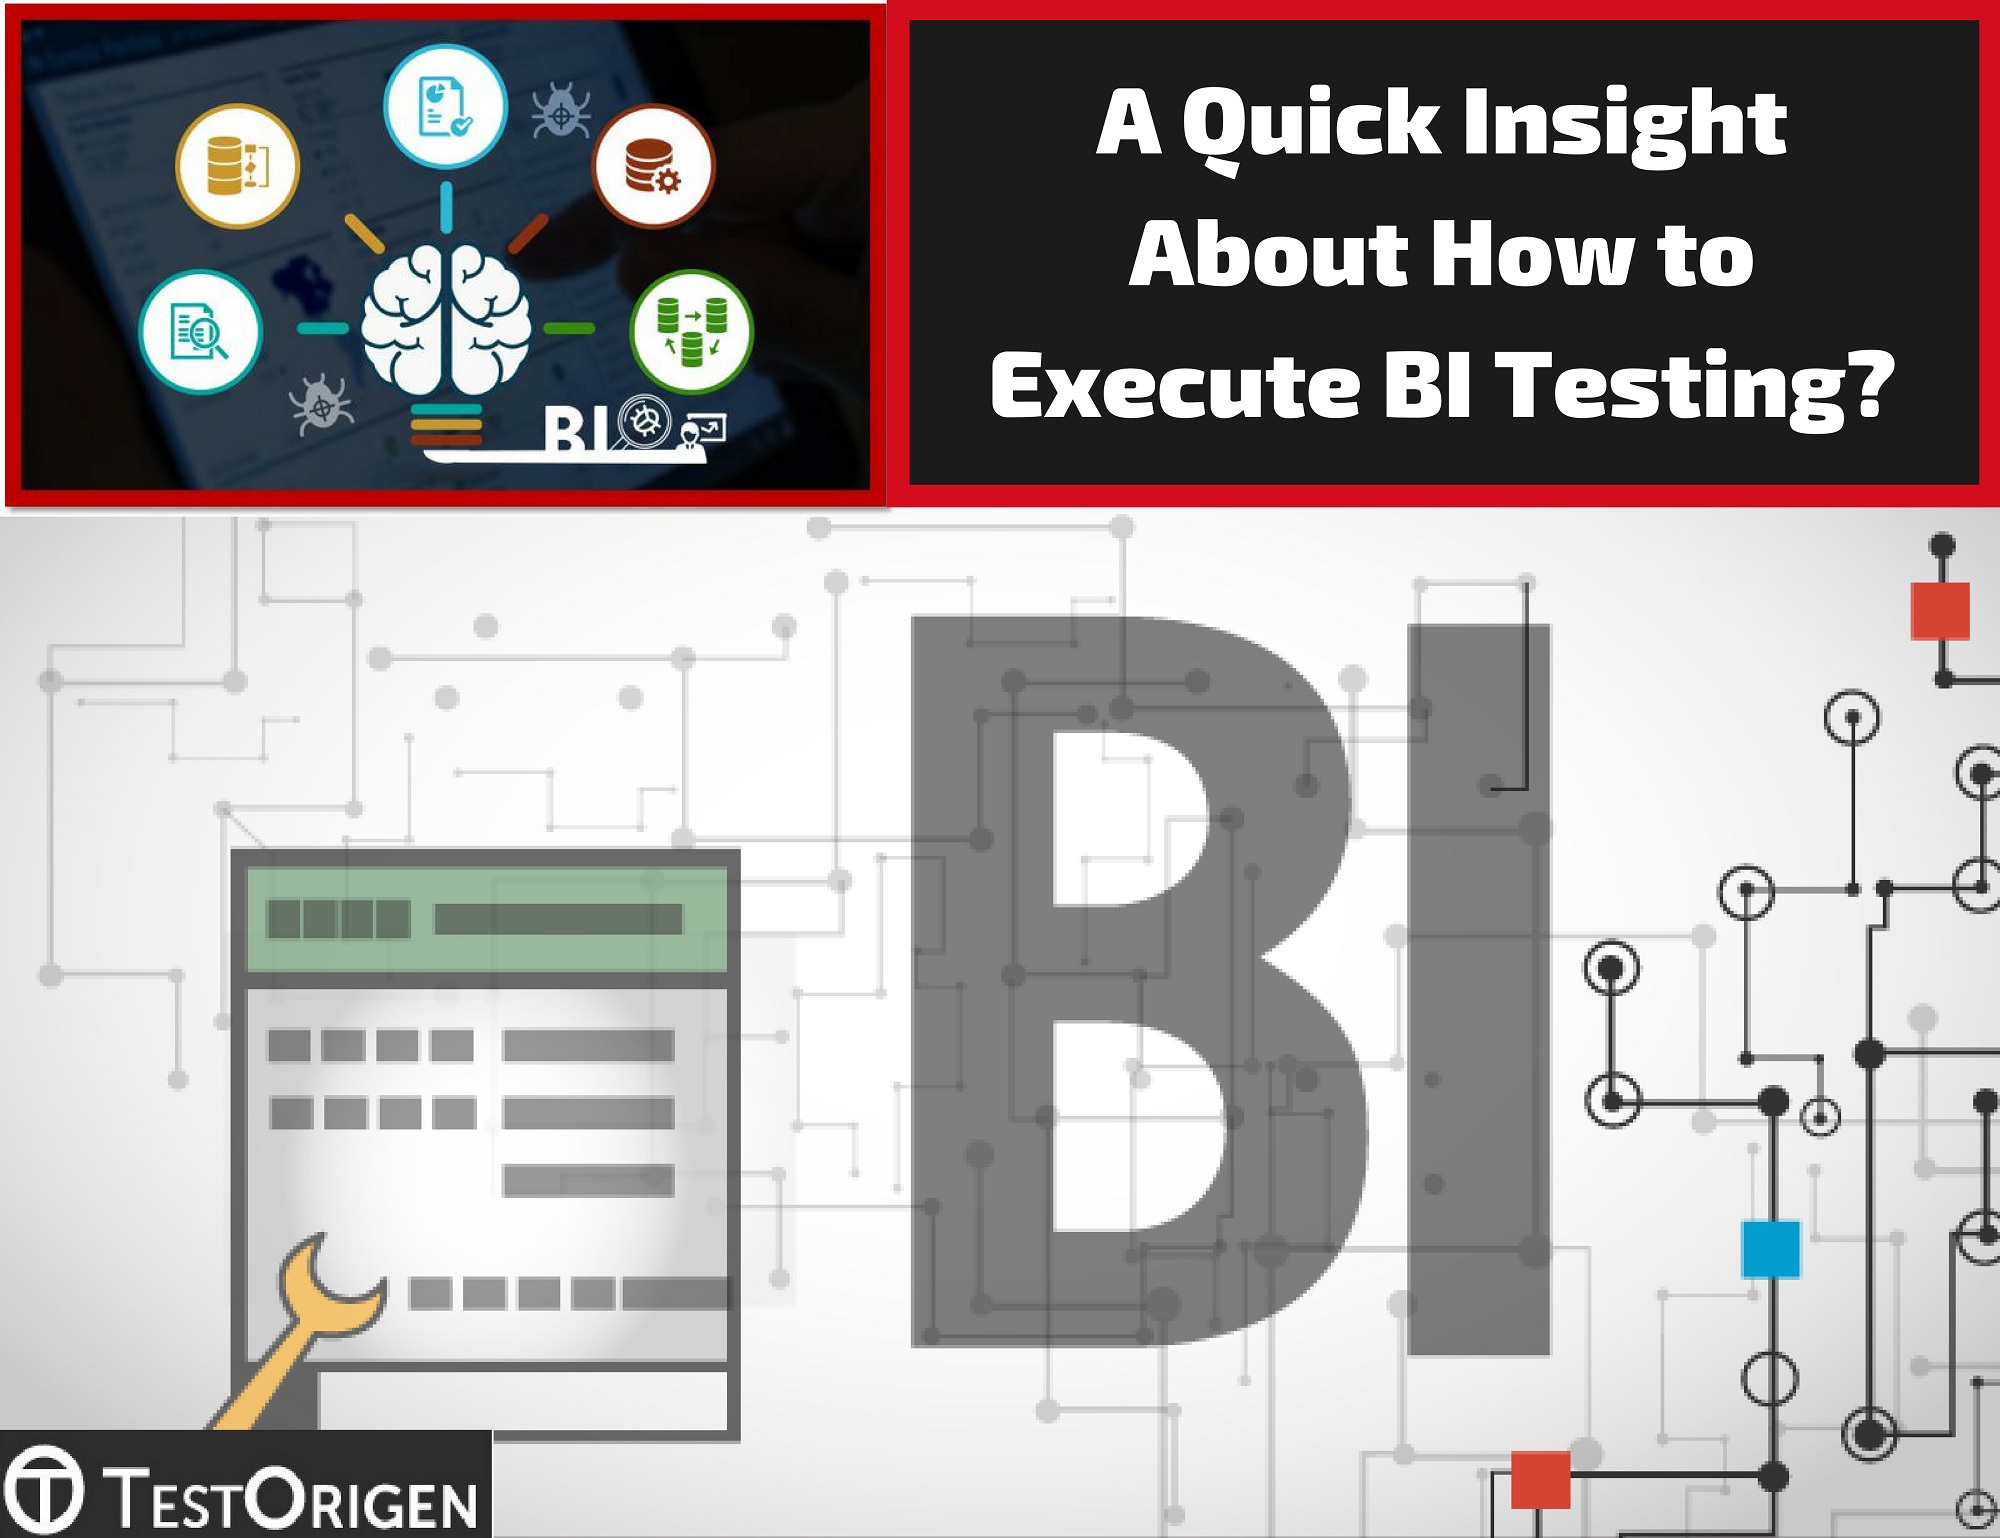 A Quick Insight About How to Execute BI Testing?